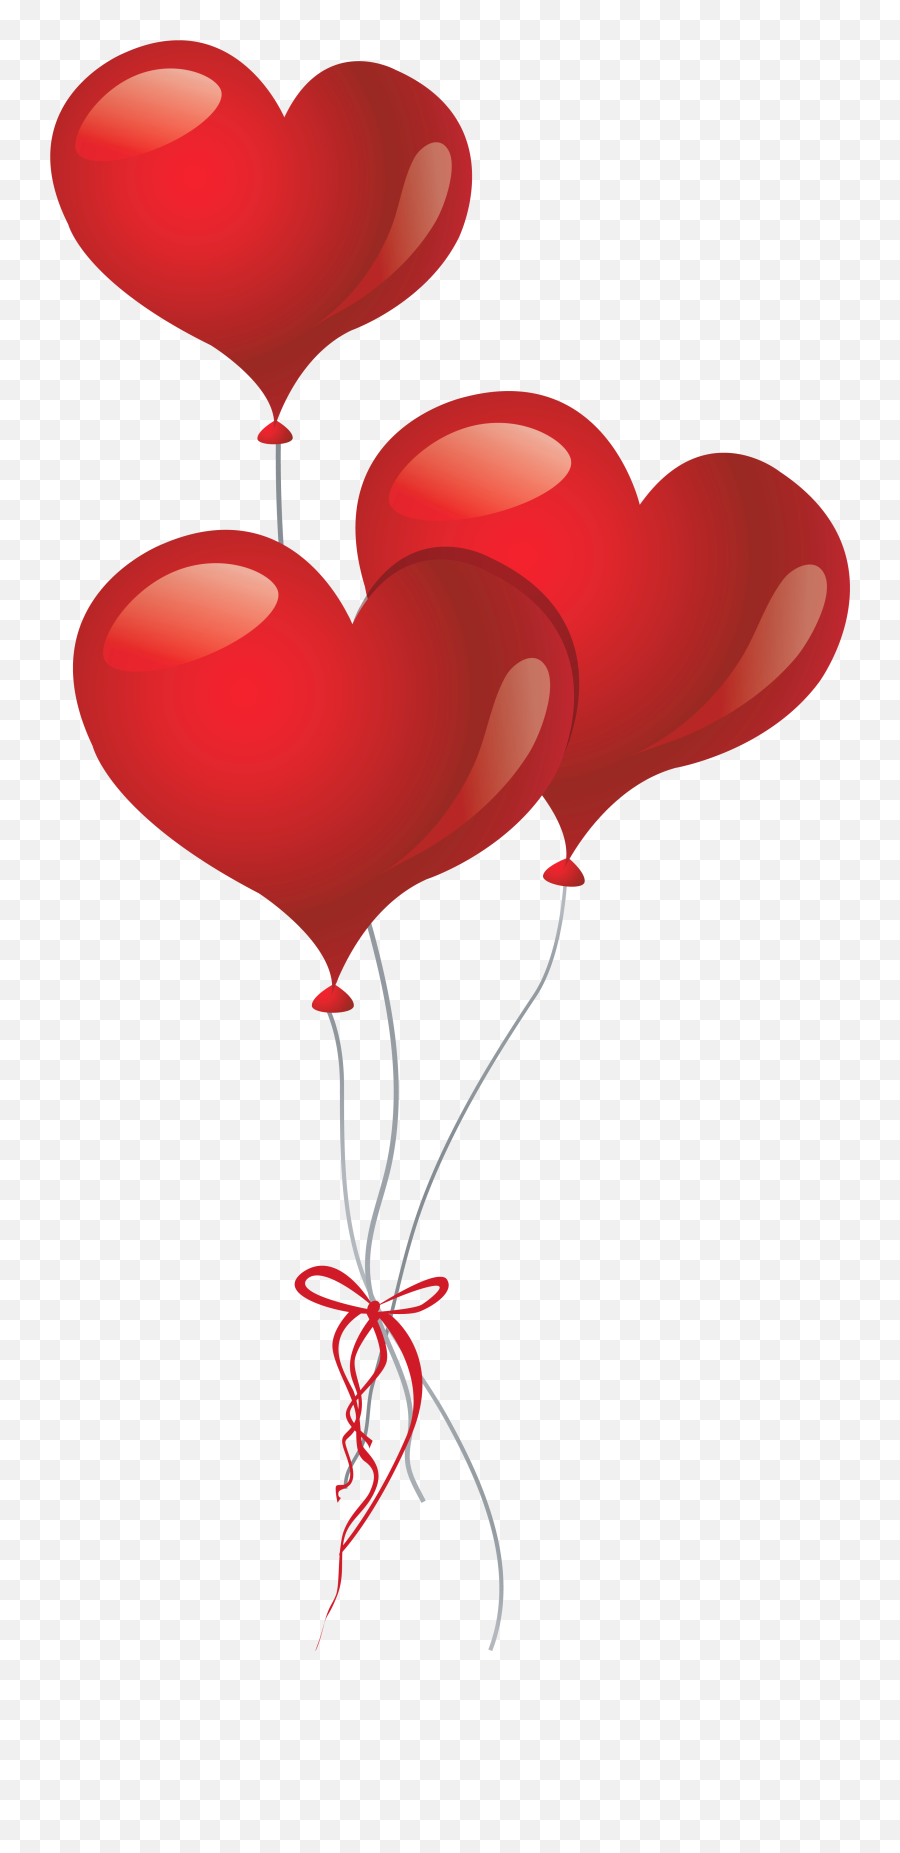 Heart Balloons Png Clipart Picture Nel 2020 Idee Per - Heart Balloons Png,Red Balloon Png